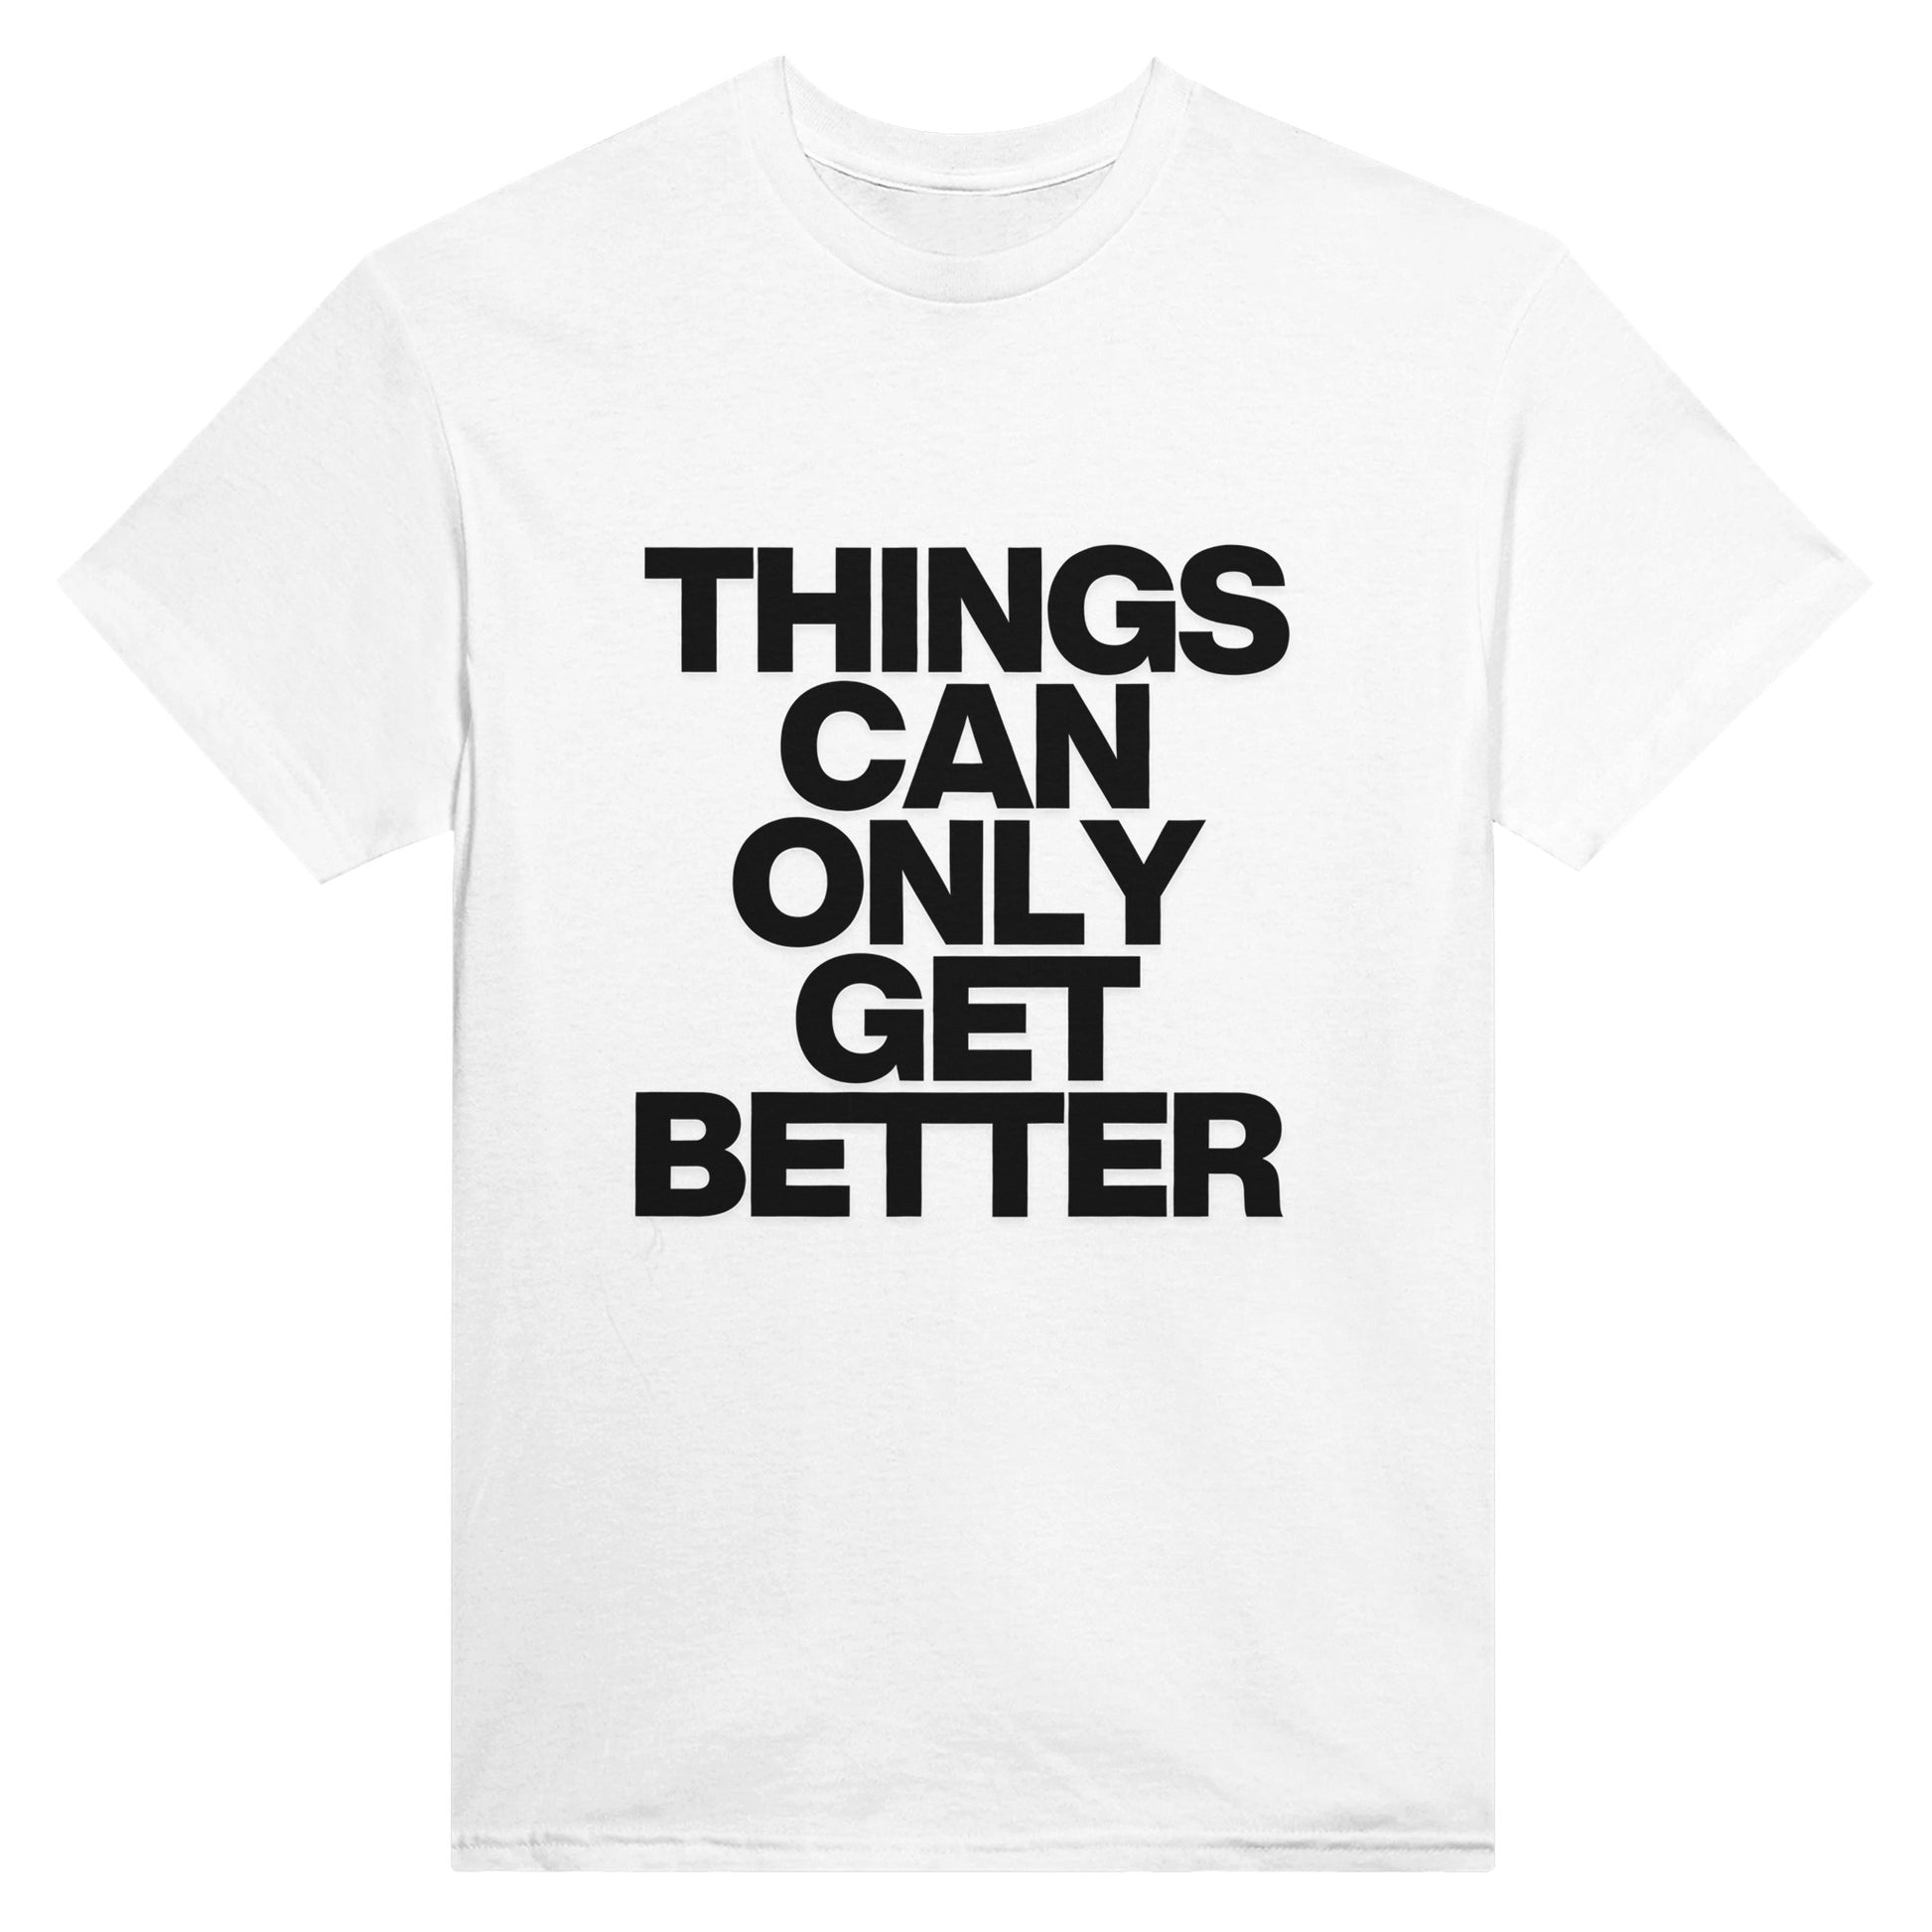 Things Can Only Get Better T-shirt in white - anti-tory election wear